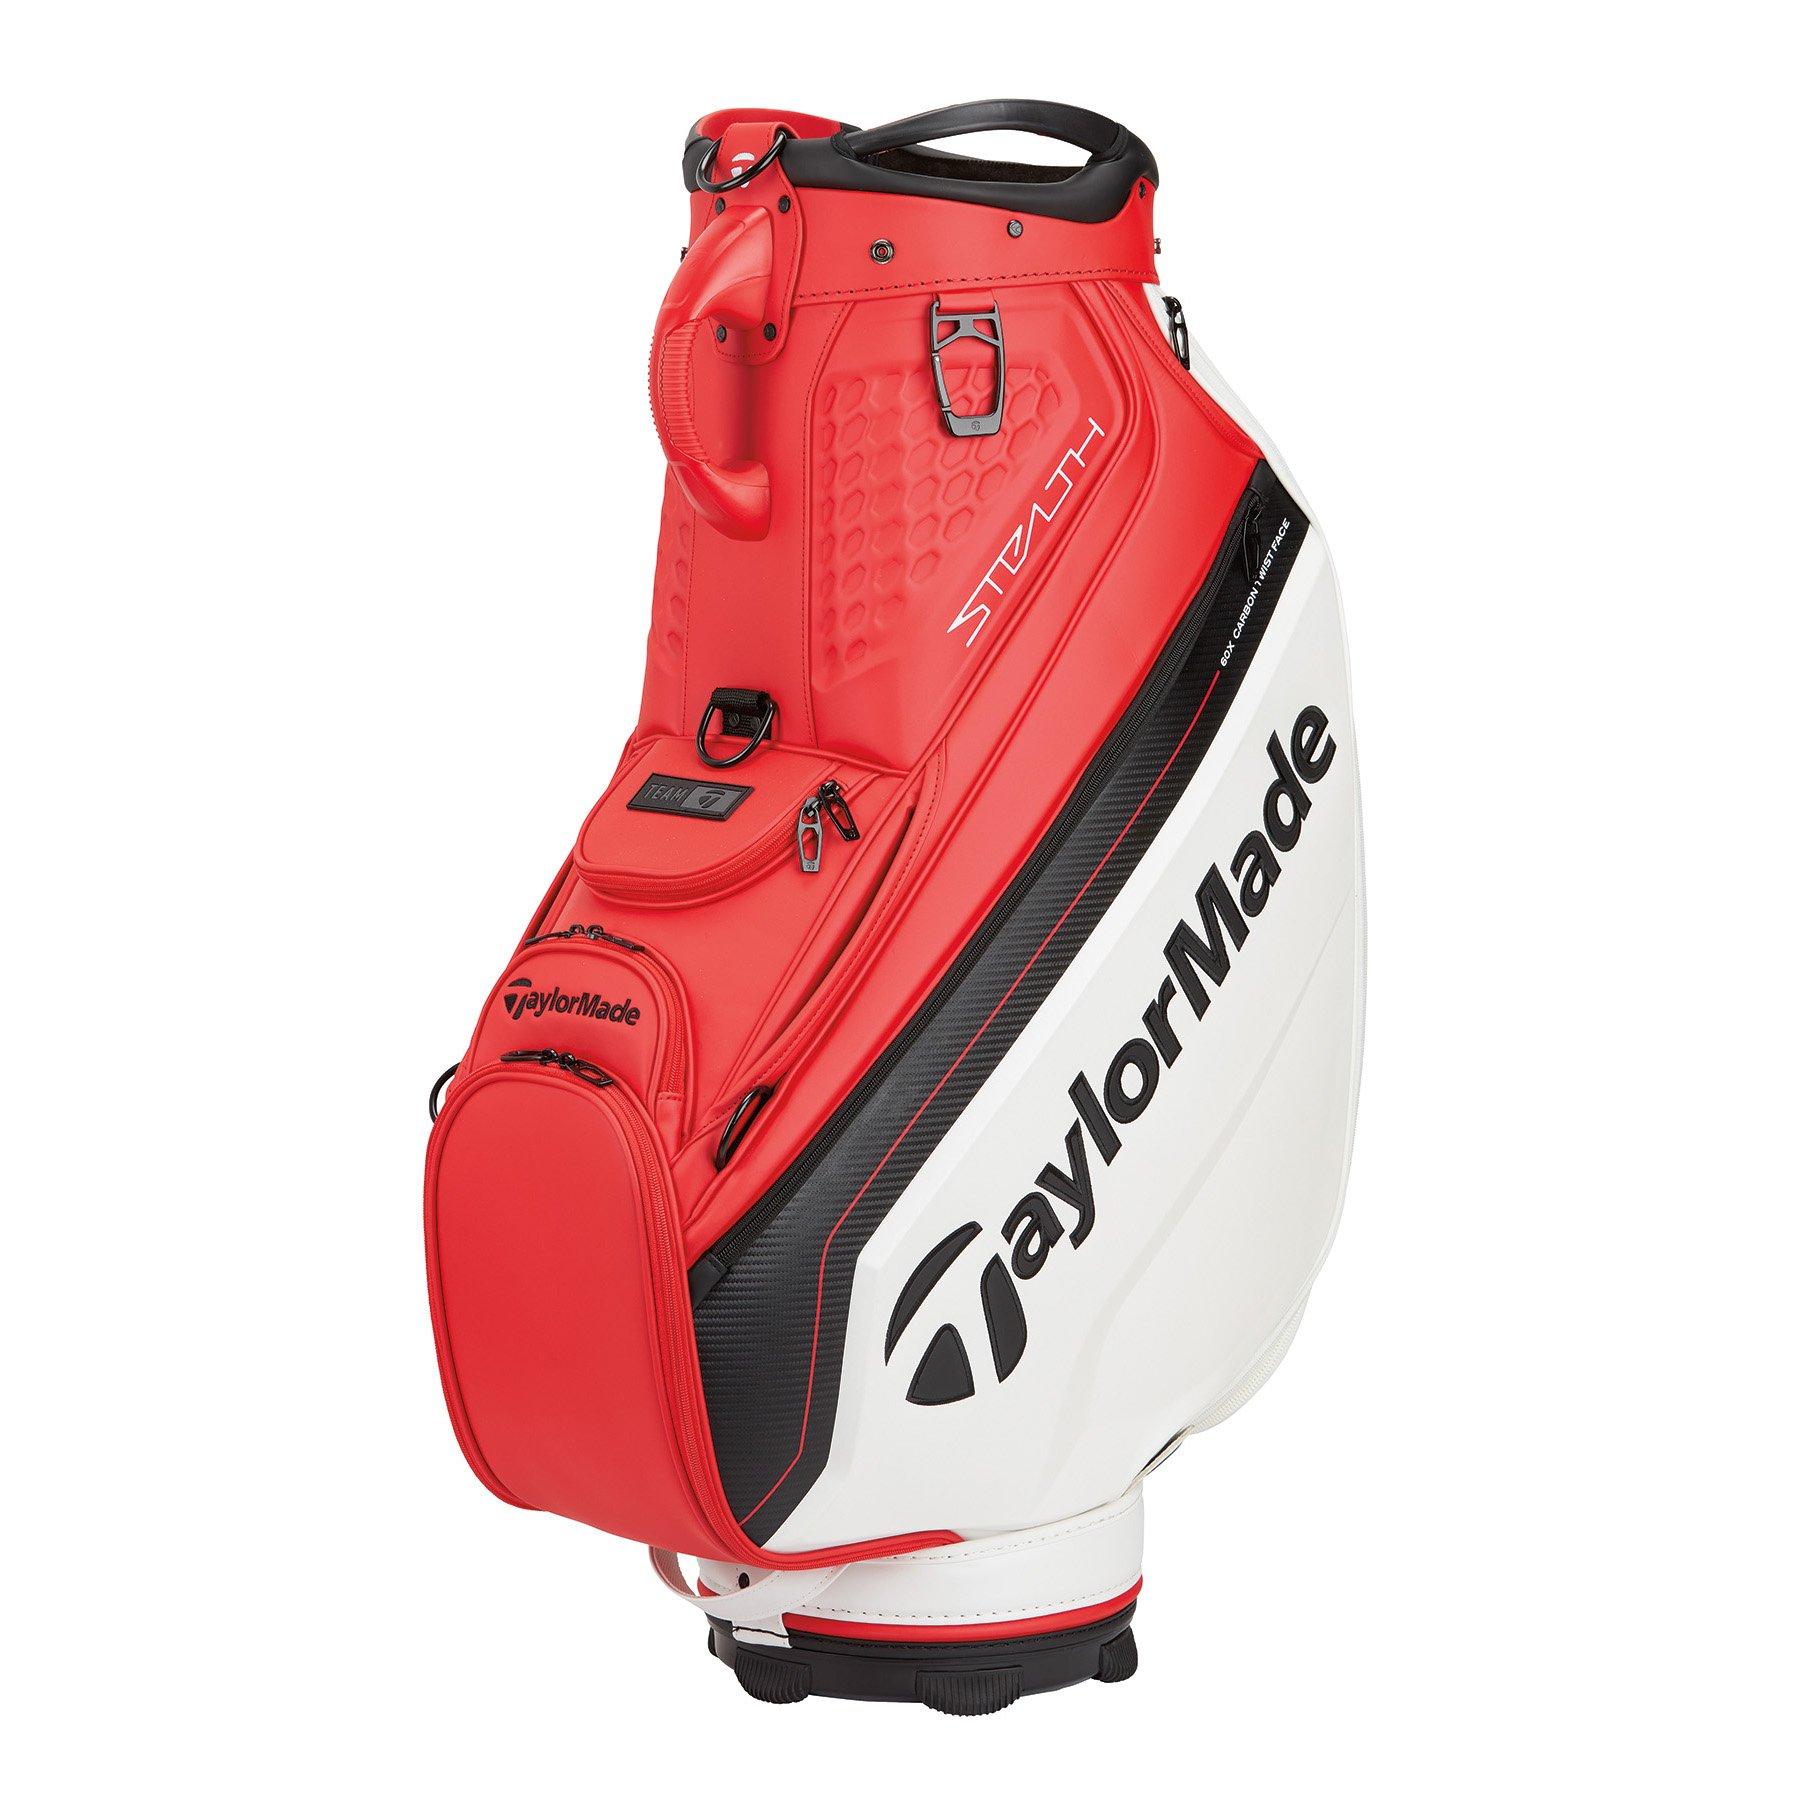 Prior Generation - Tour Staff Bag | TAYLORMADE | Golf Bags 